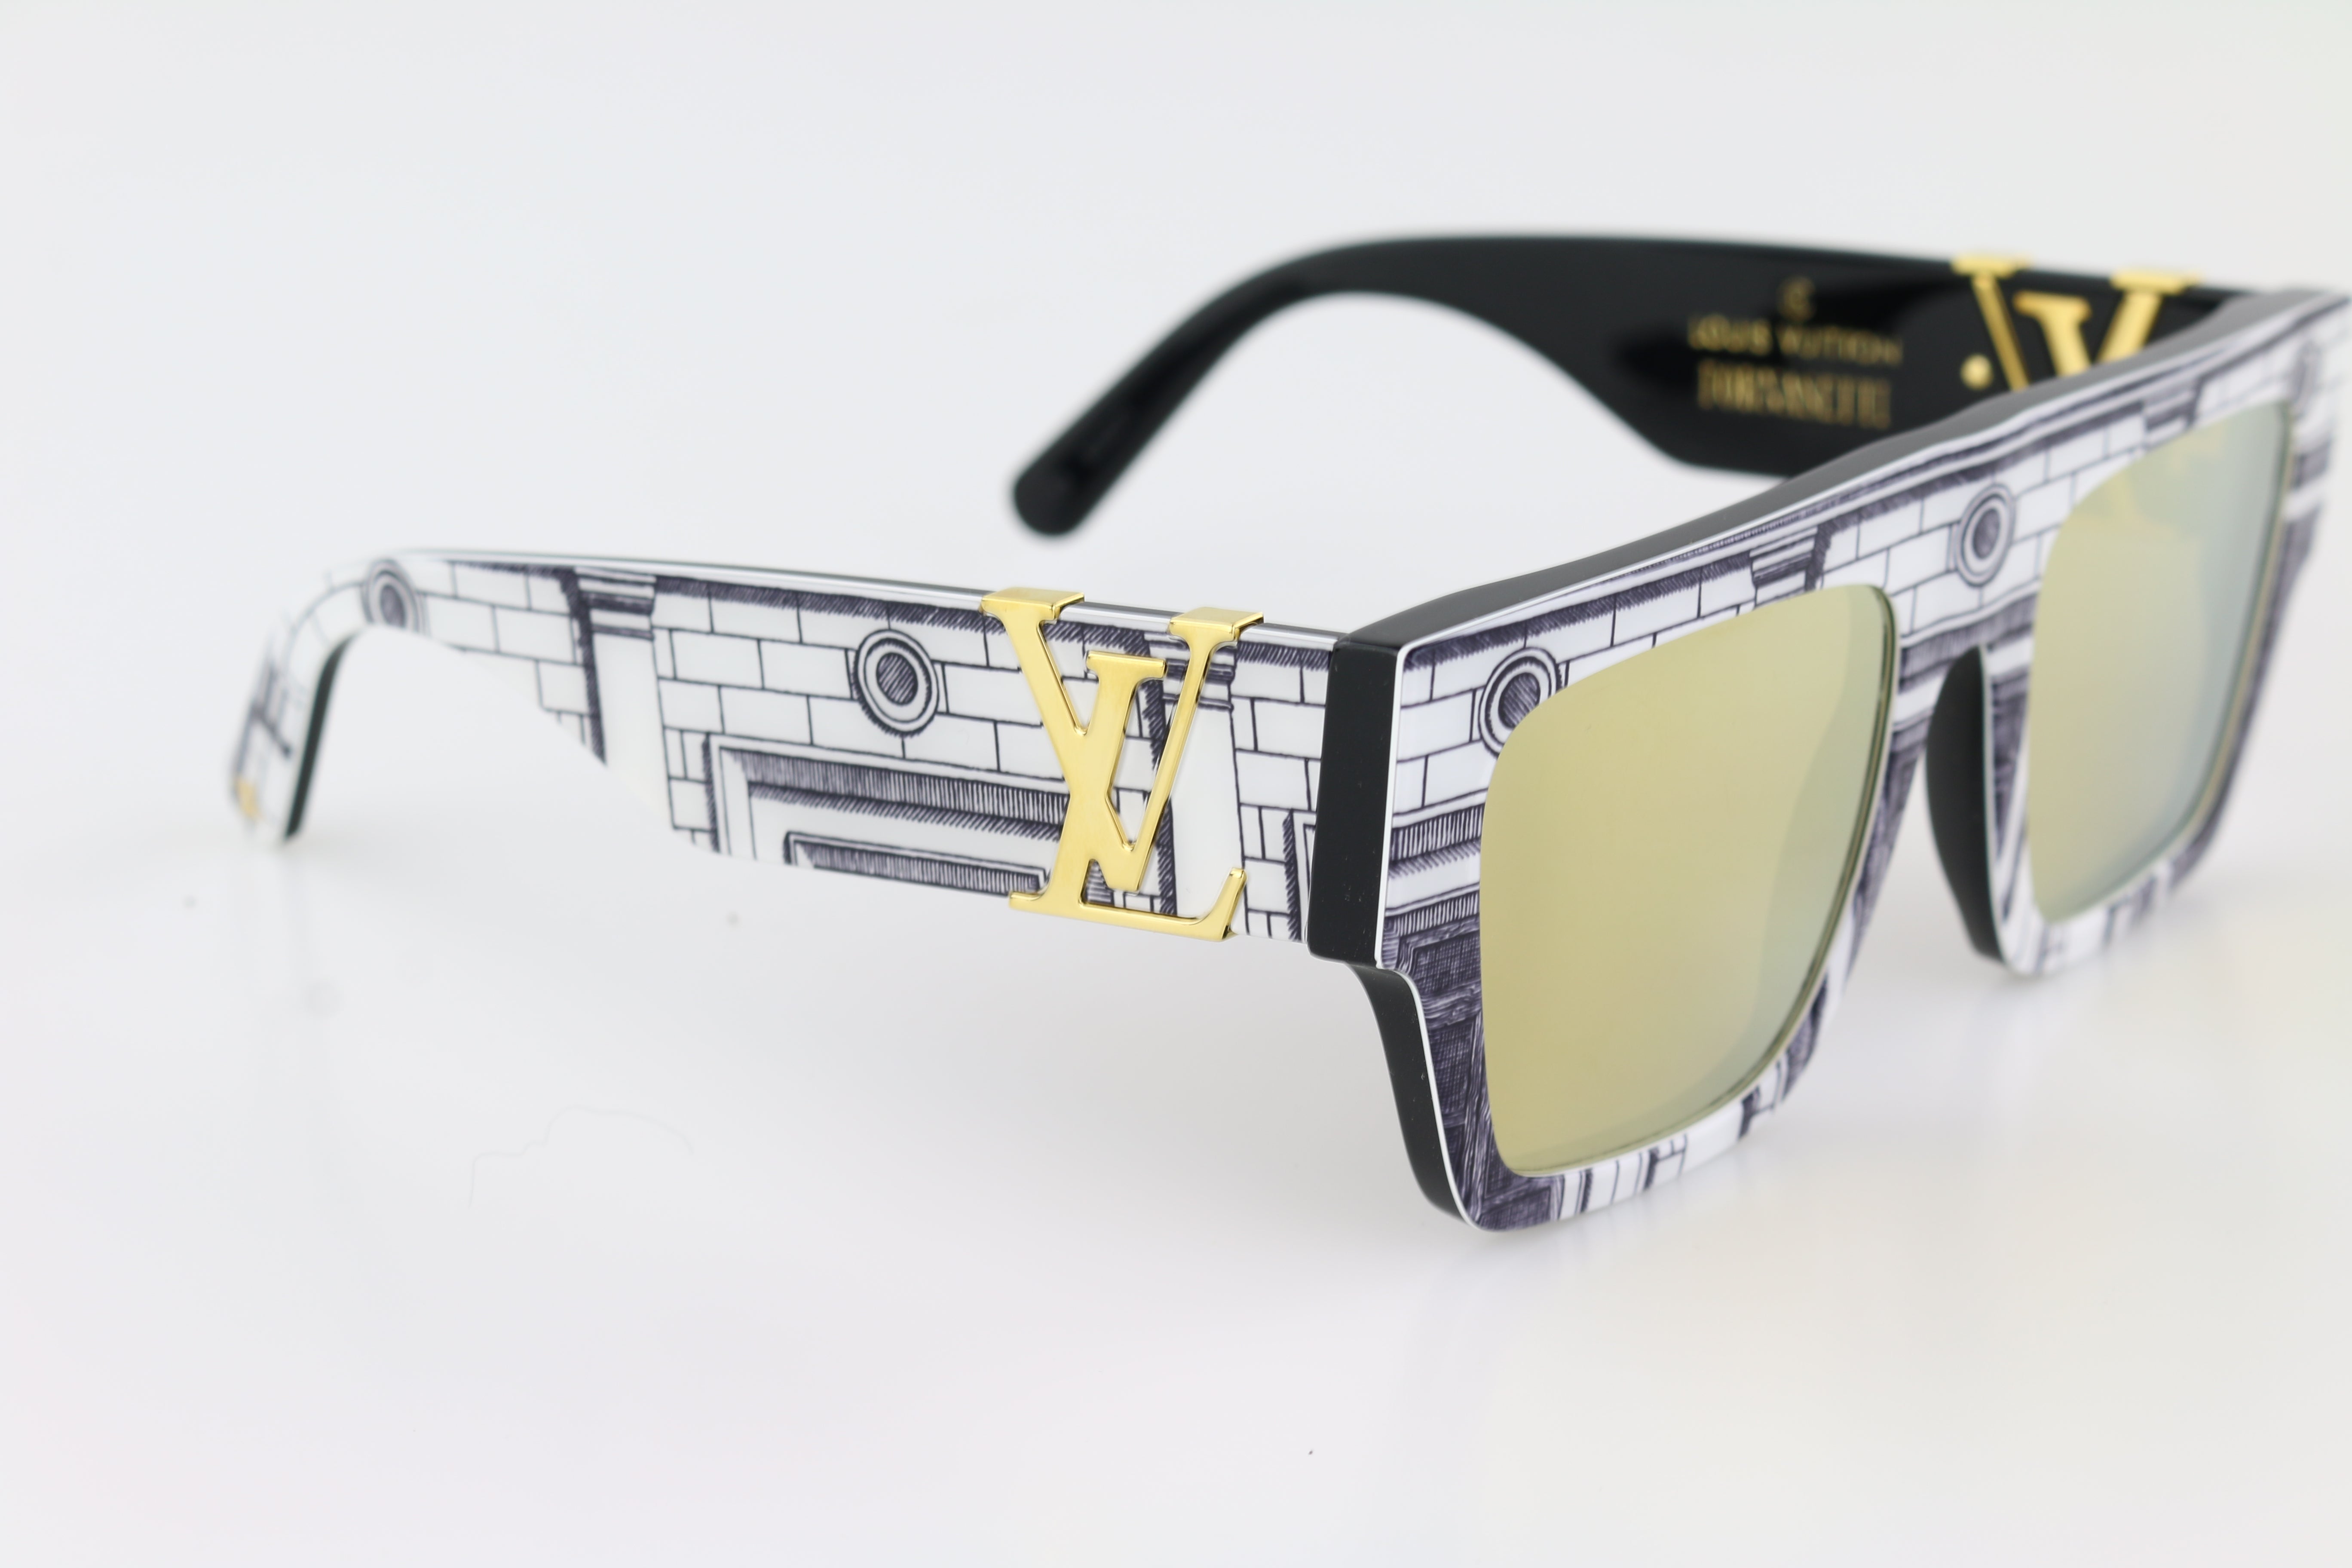 LOUIS VUITTON X Fornasetti Collaboration Sunglasses NEW at 1stDibs